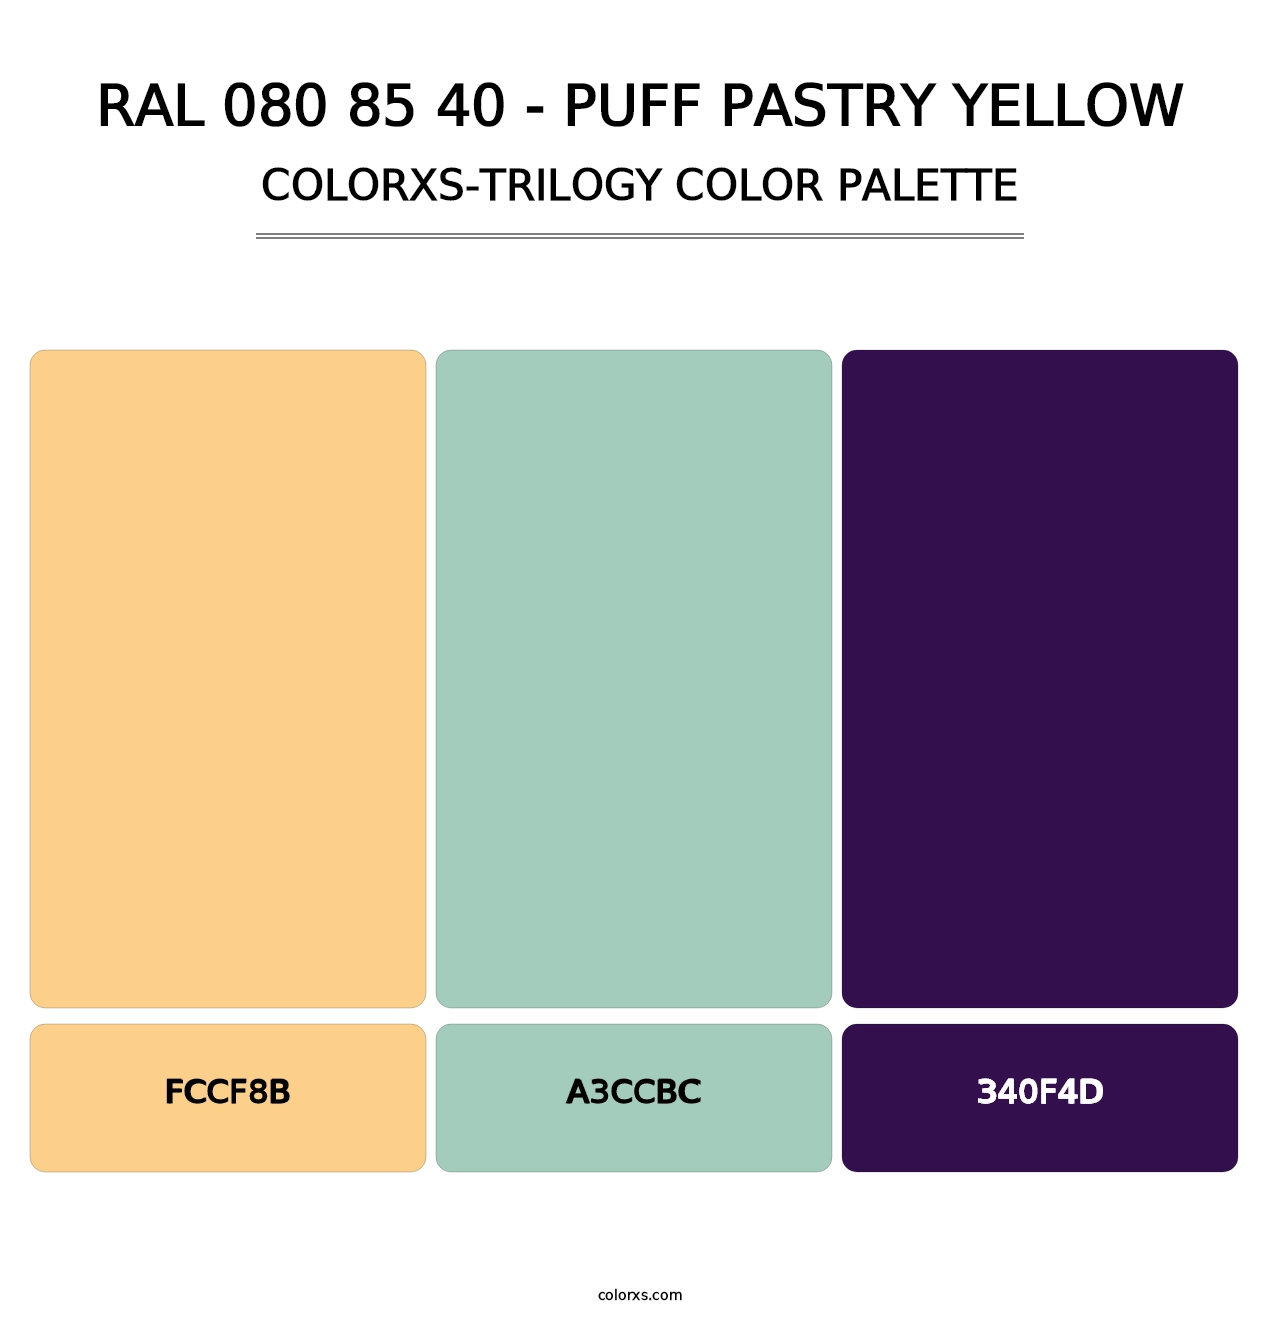 RAL 080 85 40 - Puff Pastry Yellow - Colorxs Trilogy Palette